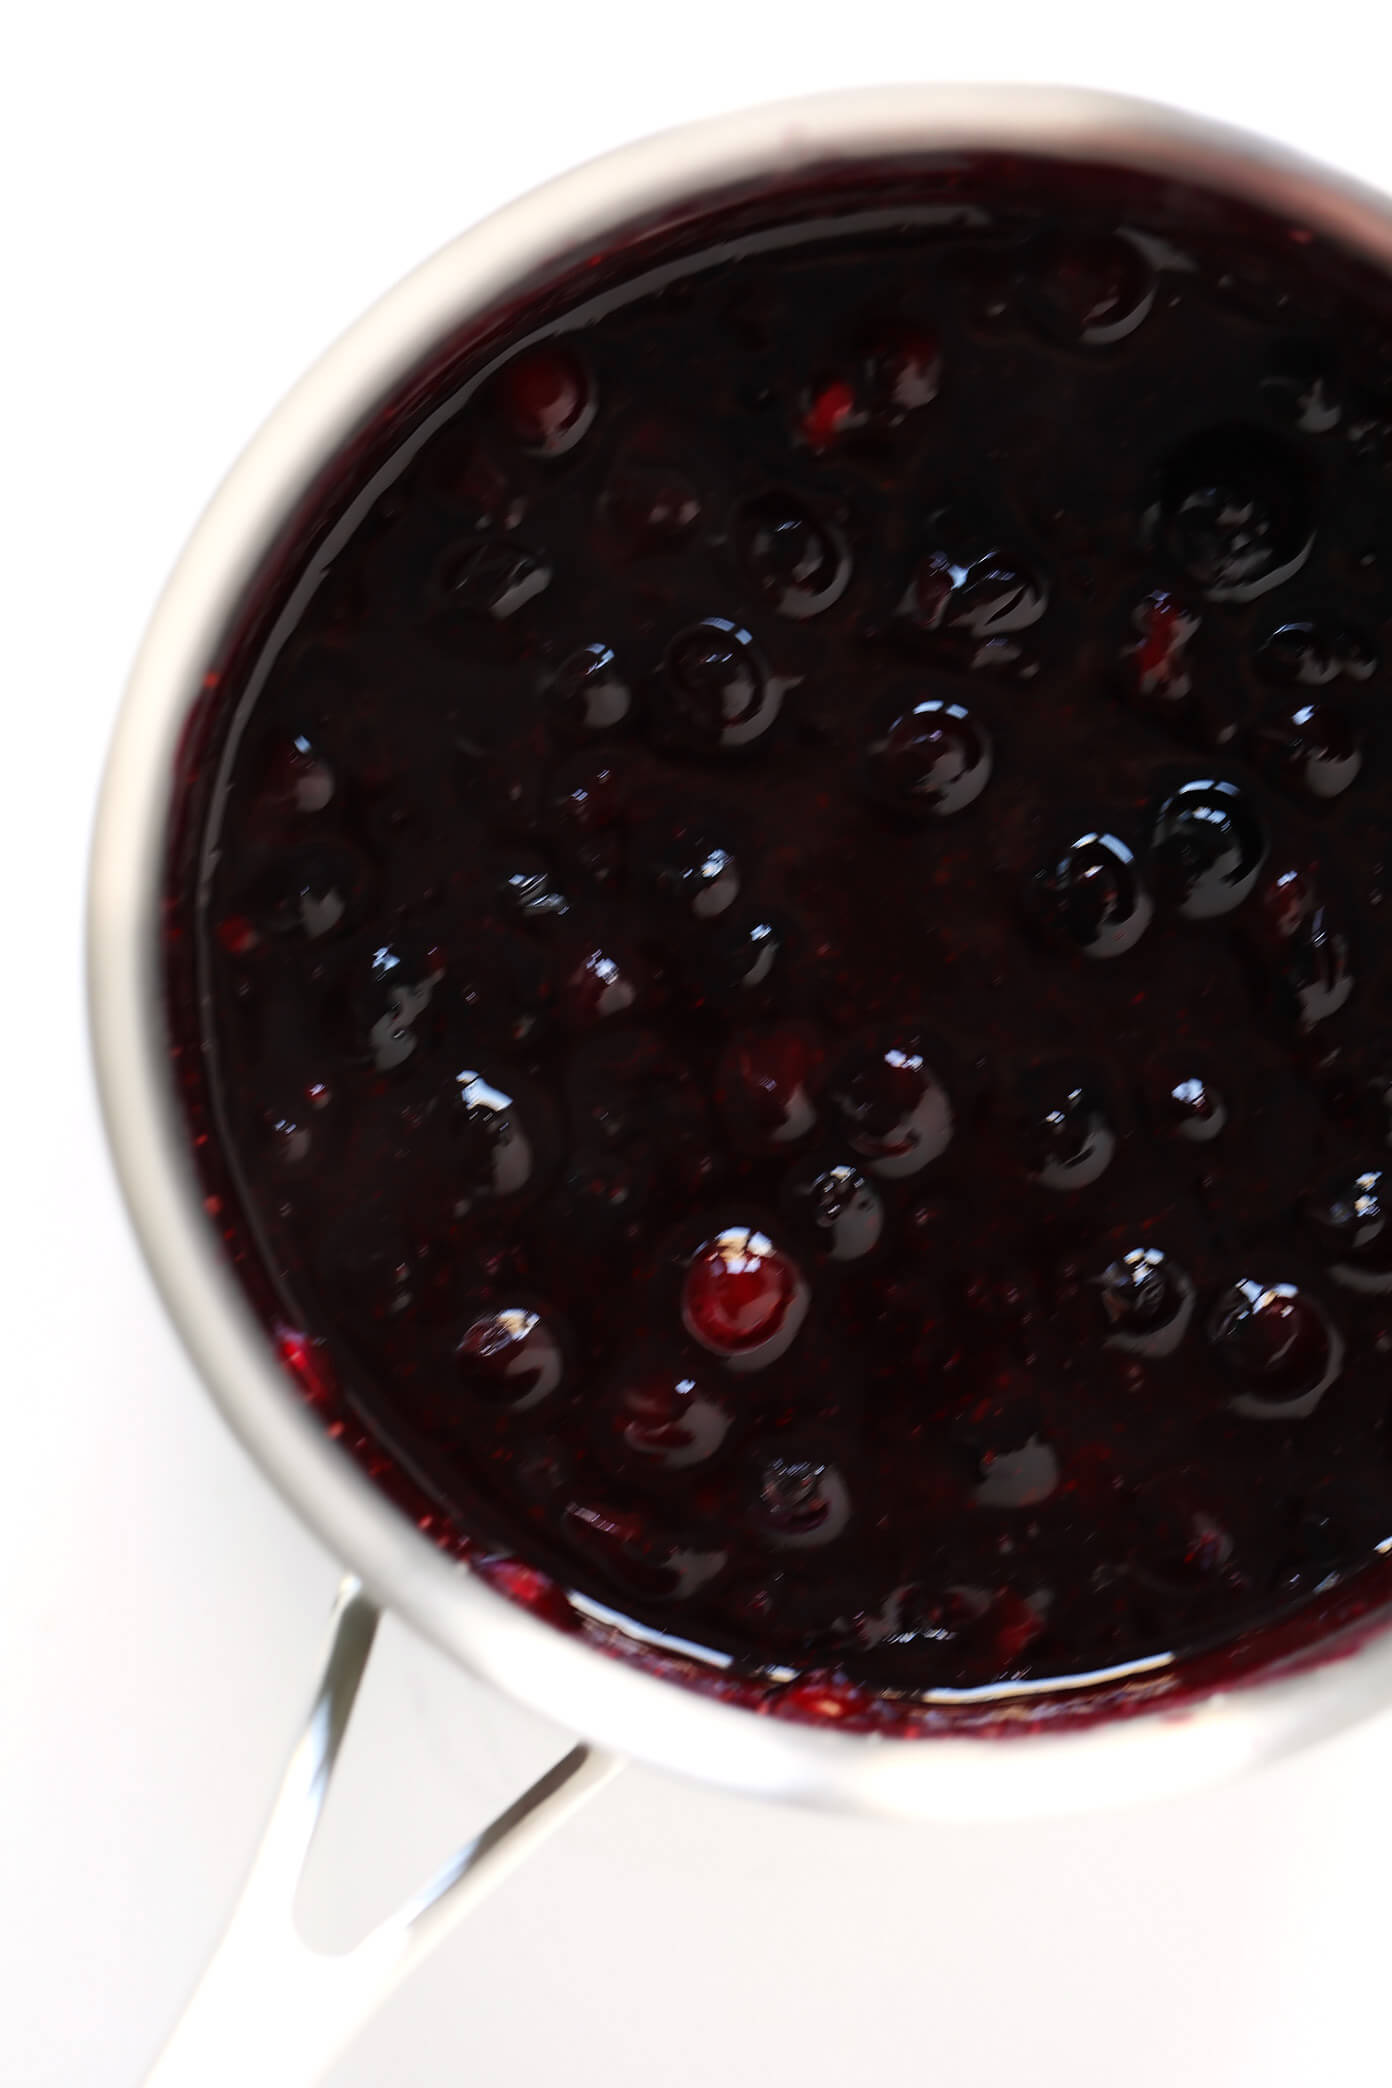 How to make blueberry filling